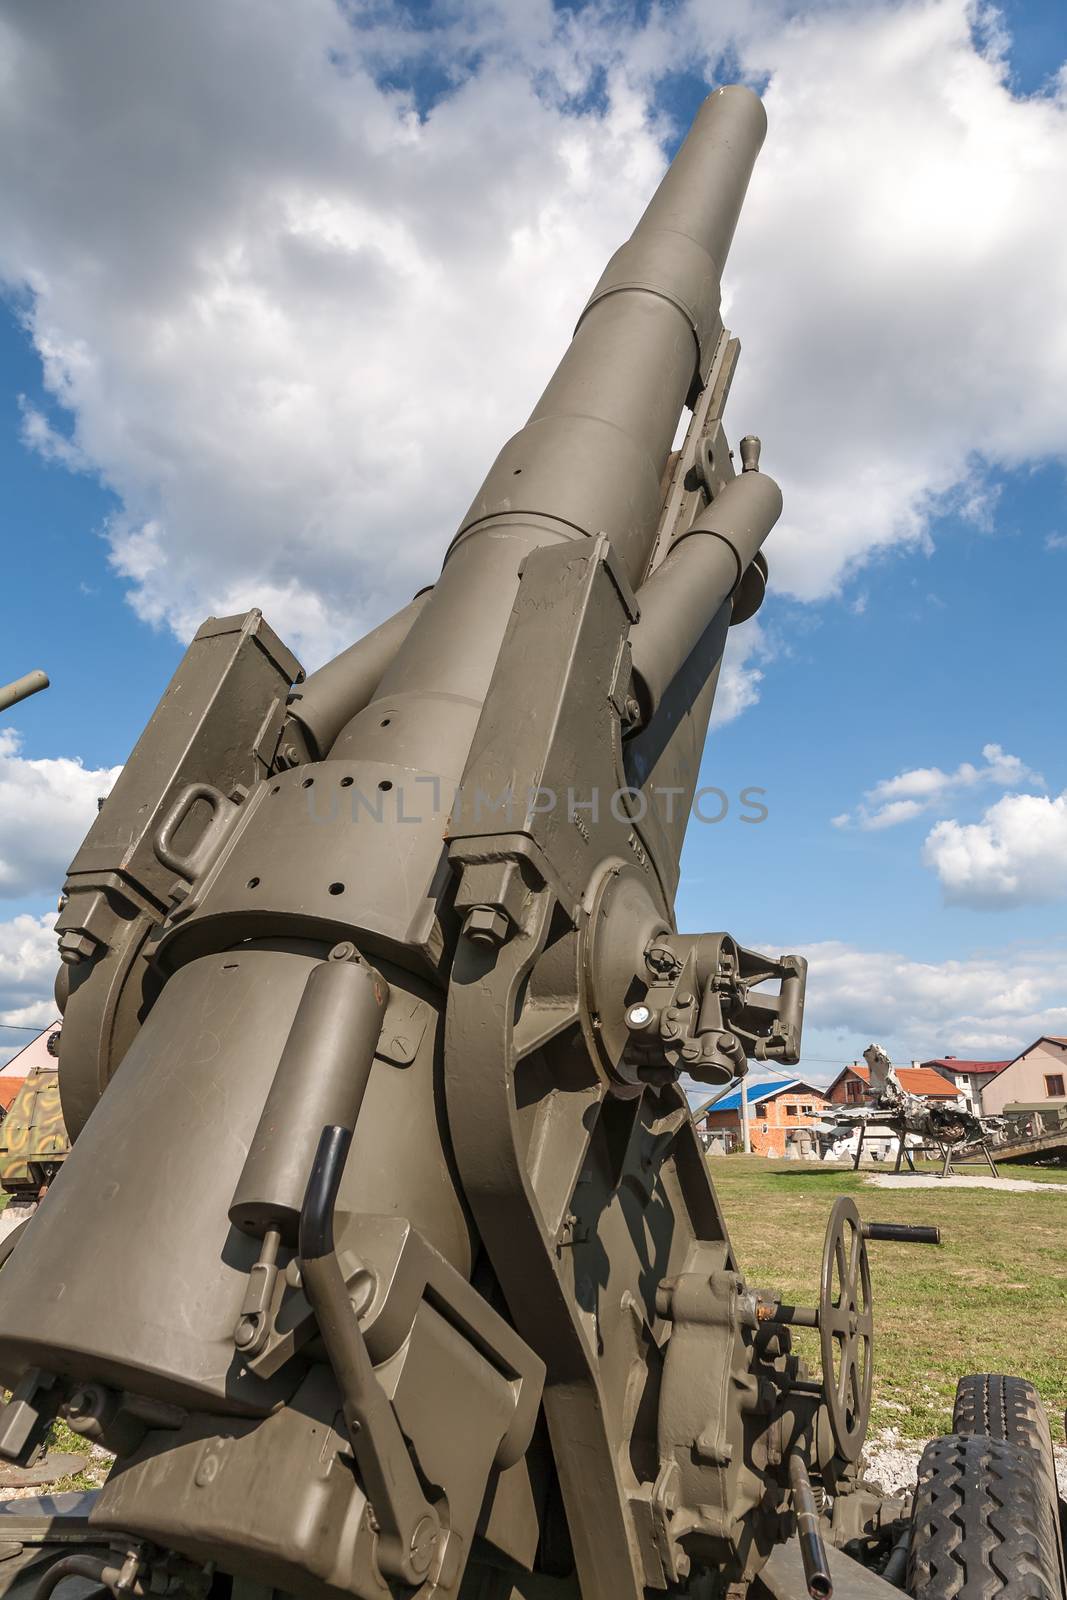 Old weapons - anti-aircraft guns, after the war in Croatia